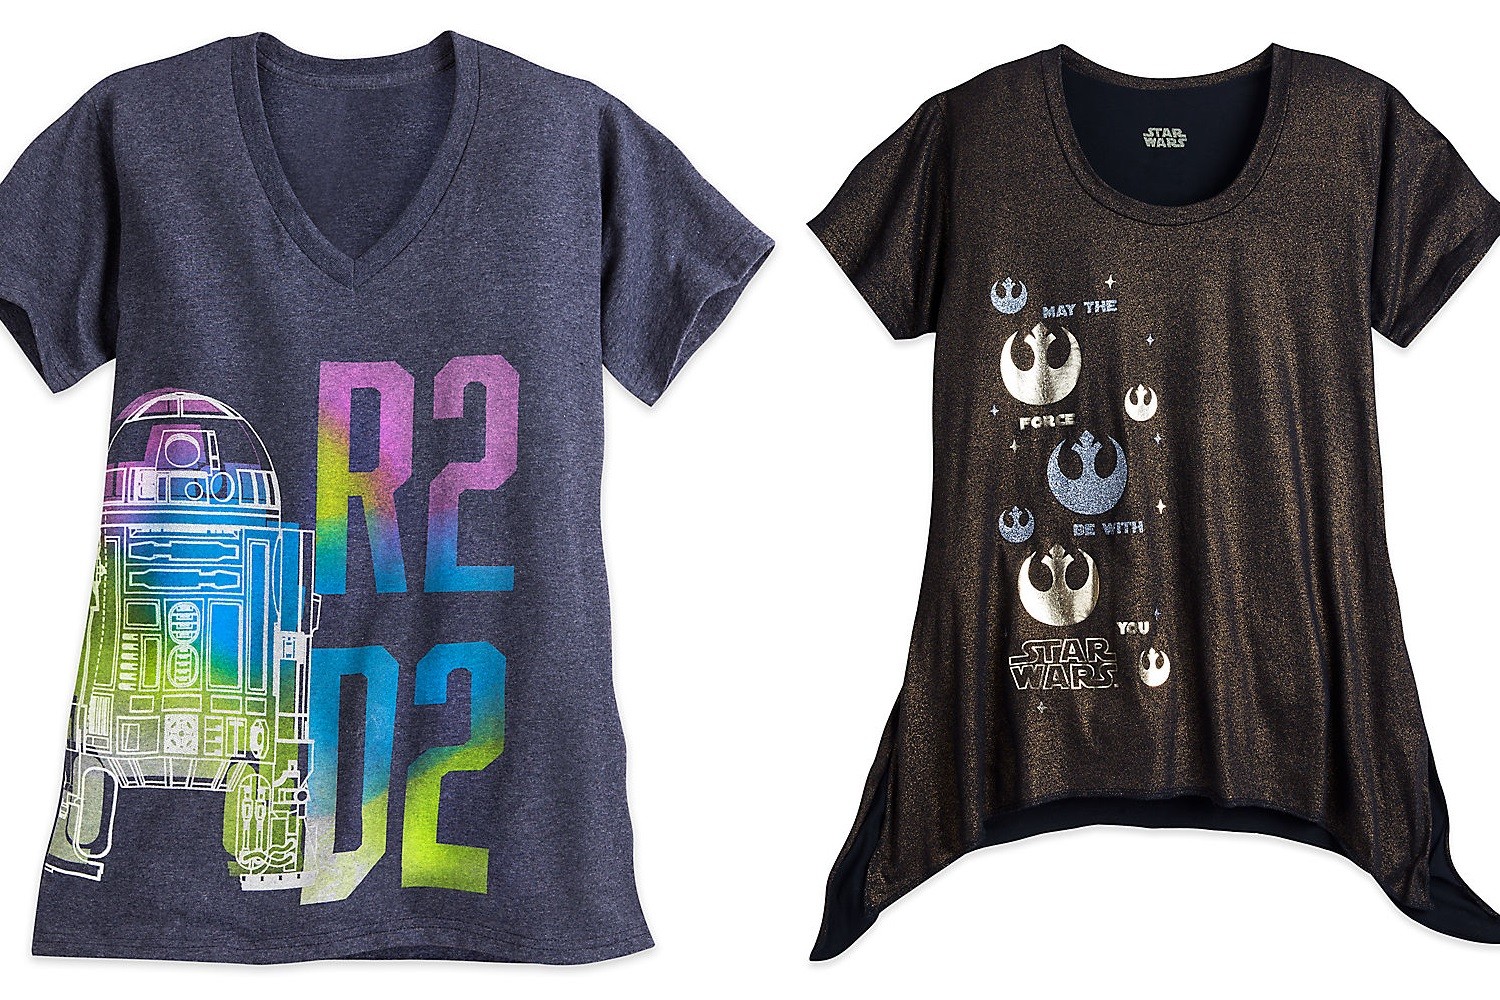 Women's Star Wars tops available at the Disney Store